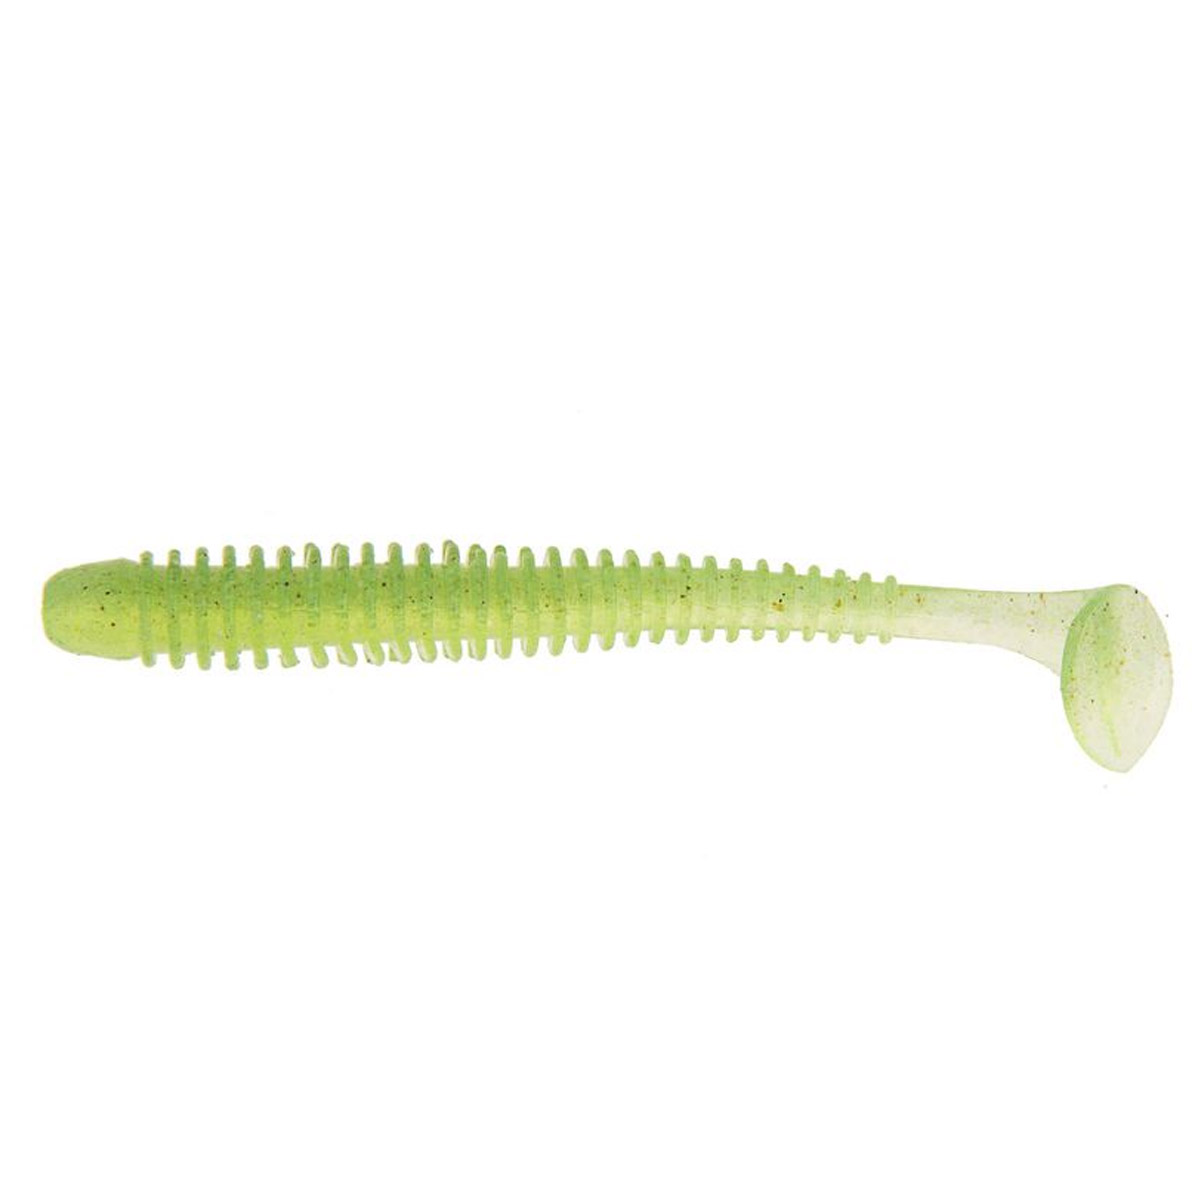 Keitech Swing Impact 3.5 Inch -  Lime Chartreuse.